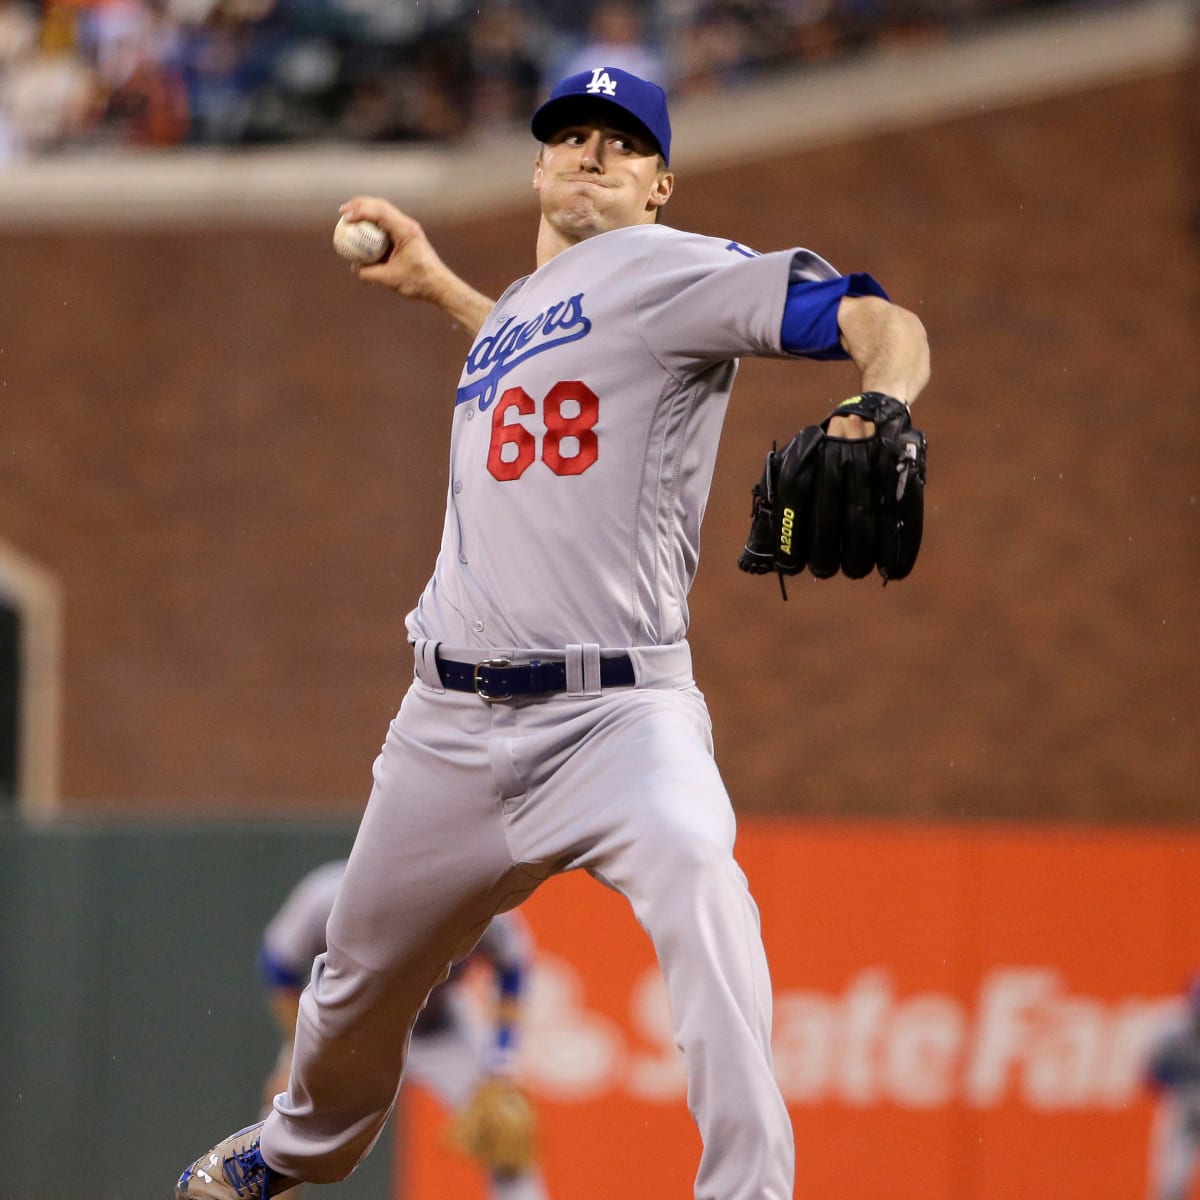 Dodgers pull Ross Stripling after 7 1/3 no-hit innings in MLB debut -  Sports Illustrated